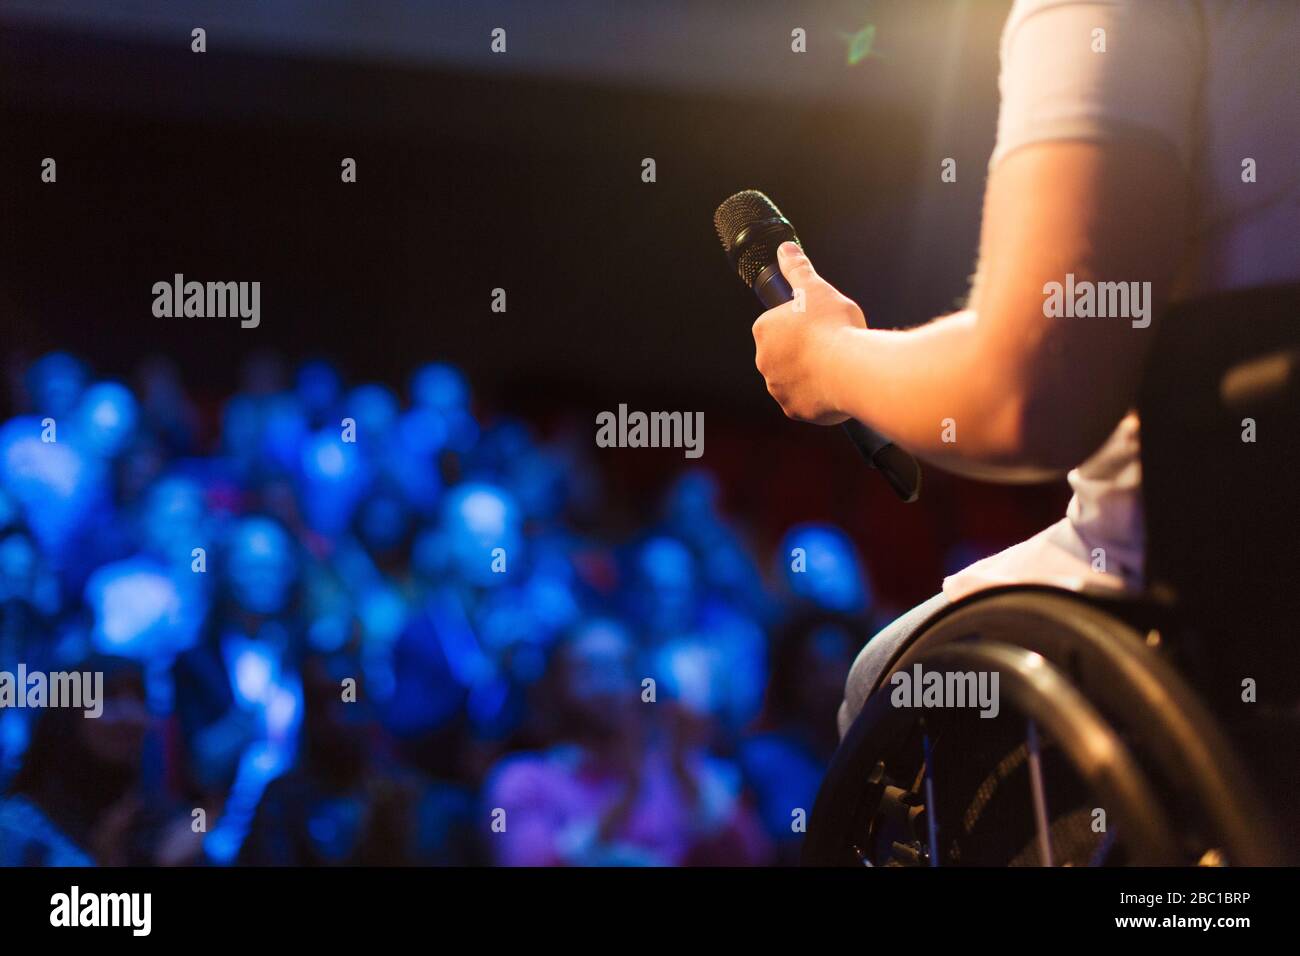 Female speaker in wheelchair holding microphone on stage Stock Photo